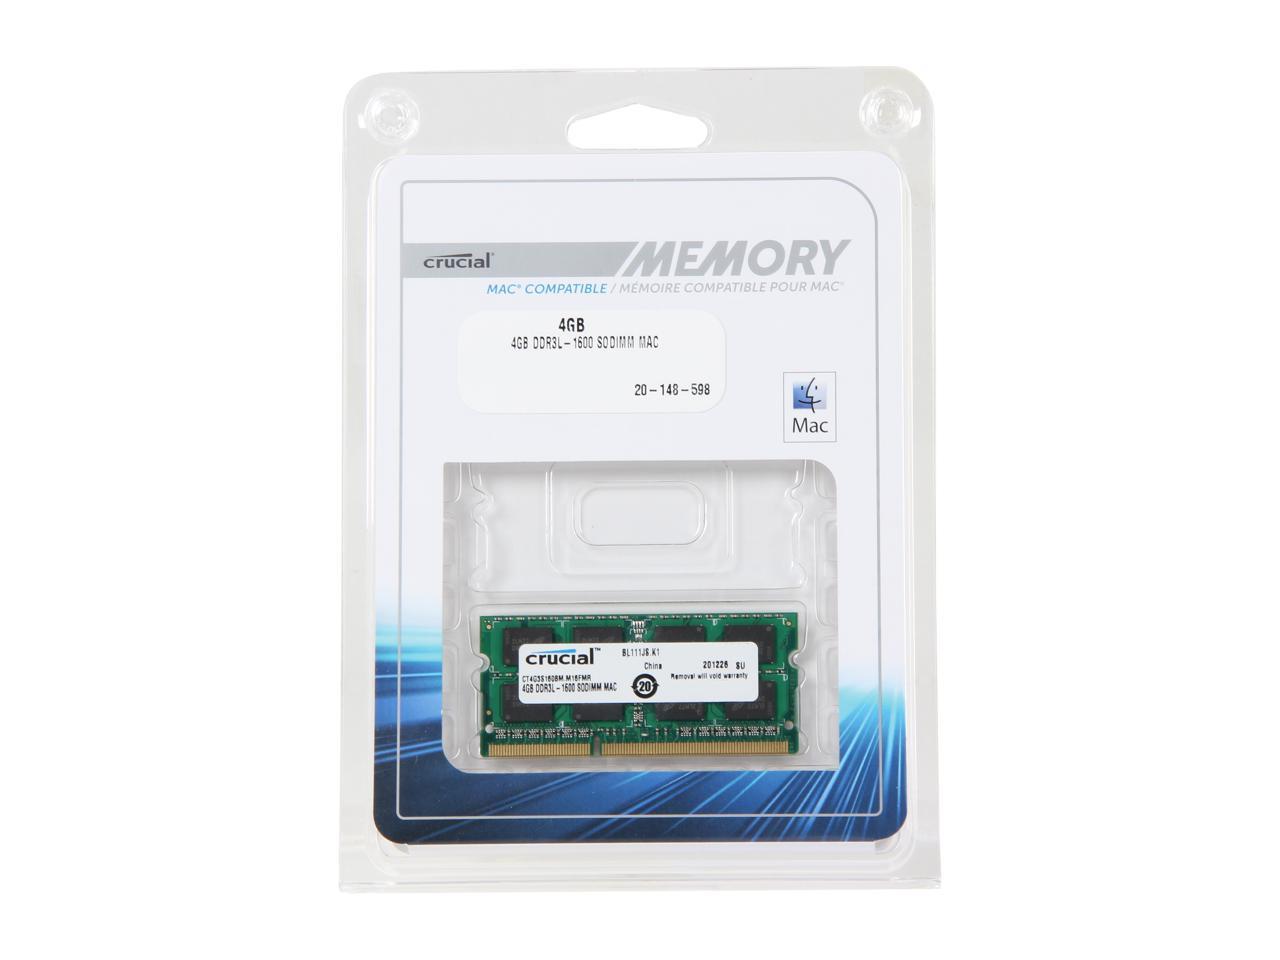 Crucial 4GB DDR3 1600 (PC3 12800) Memory for Apple Model CT4G3S160BM